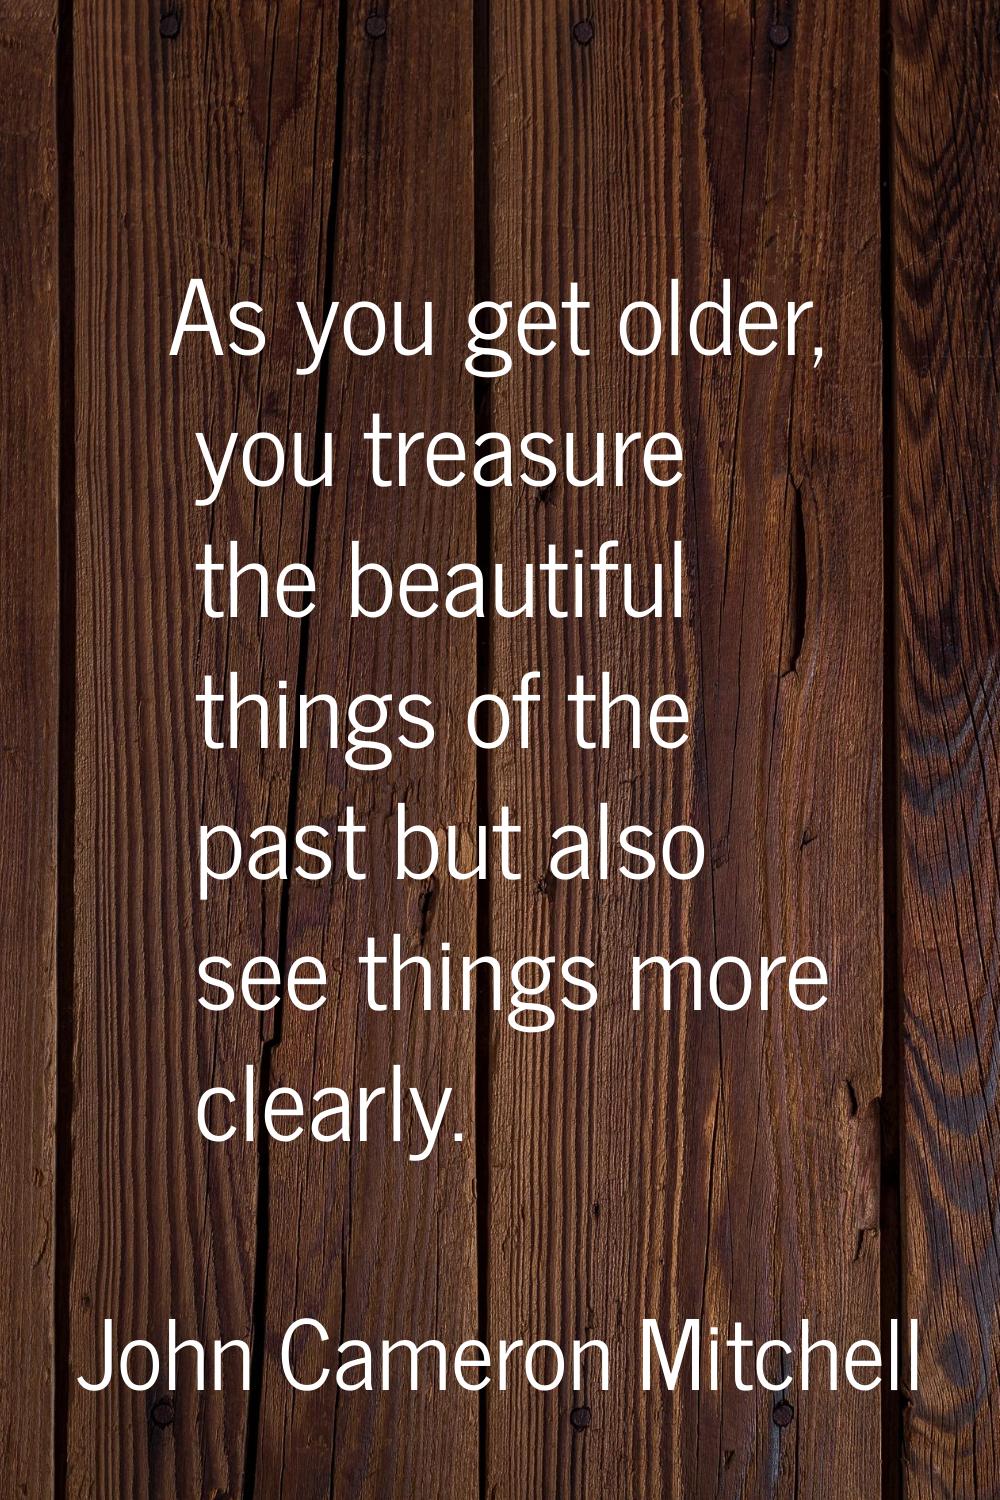 As you get older, you treasure the beautiful things of the past but also see things more clearly.